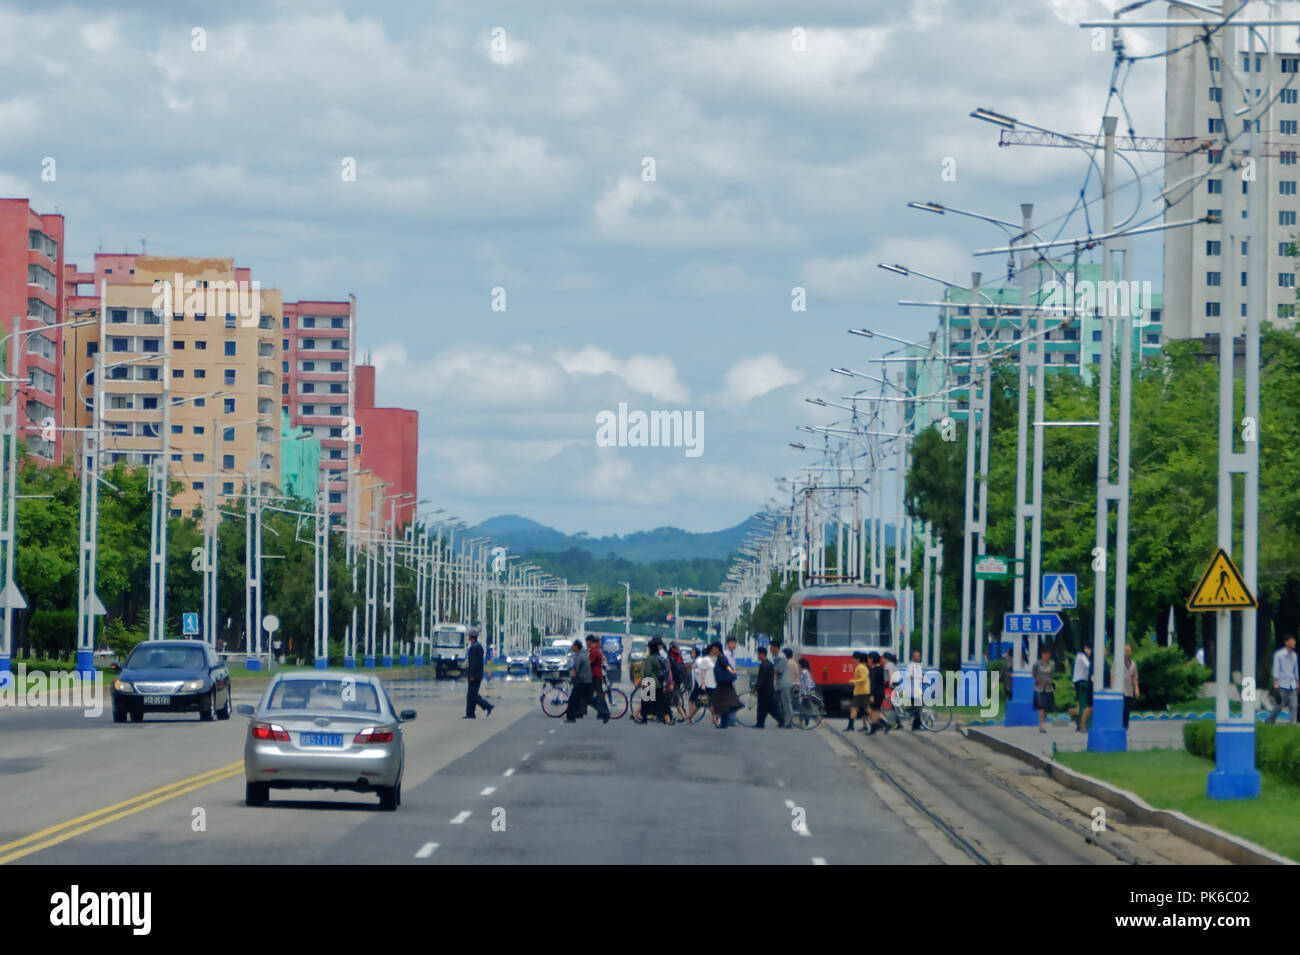 Safety in numbers as Pyongyang residents cross the road, North Korea Stock Photo